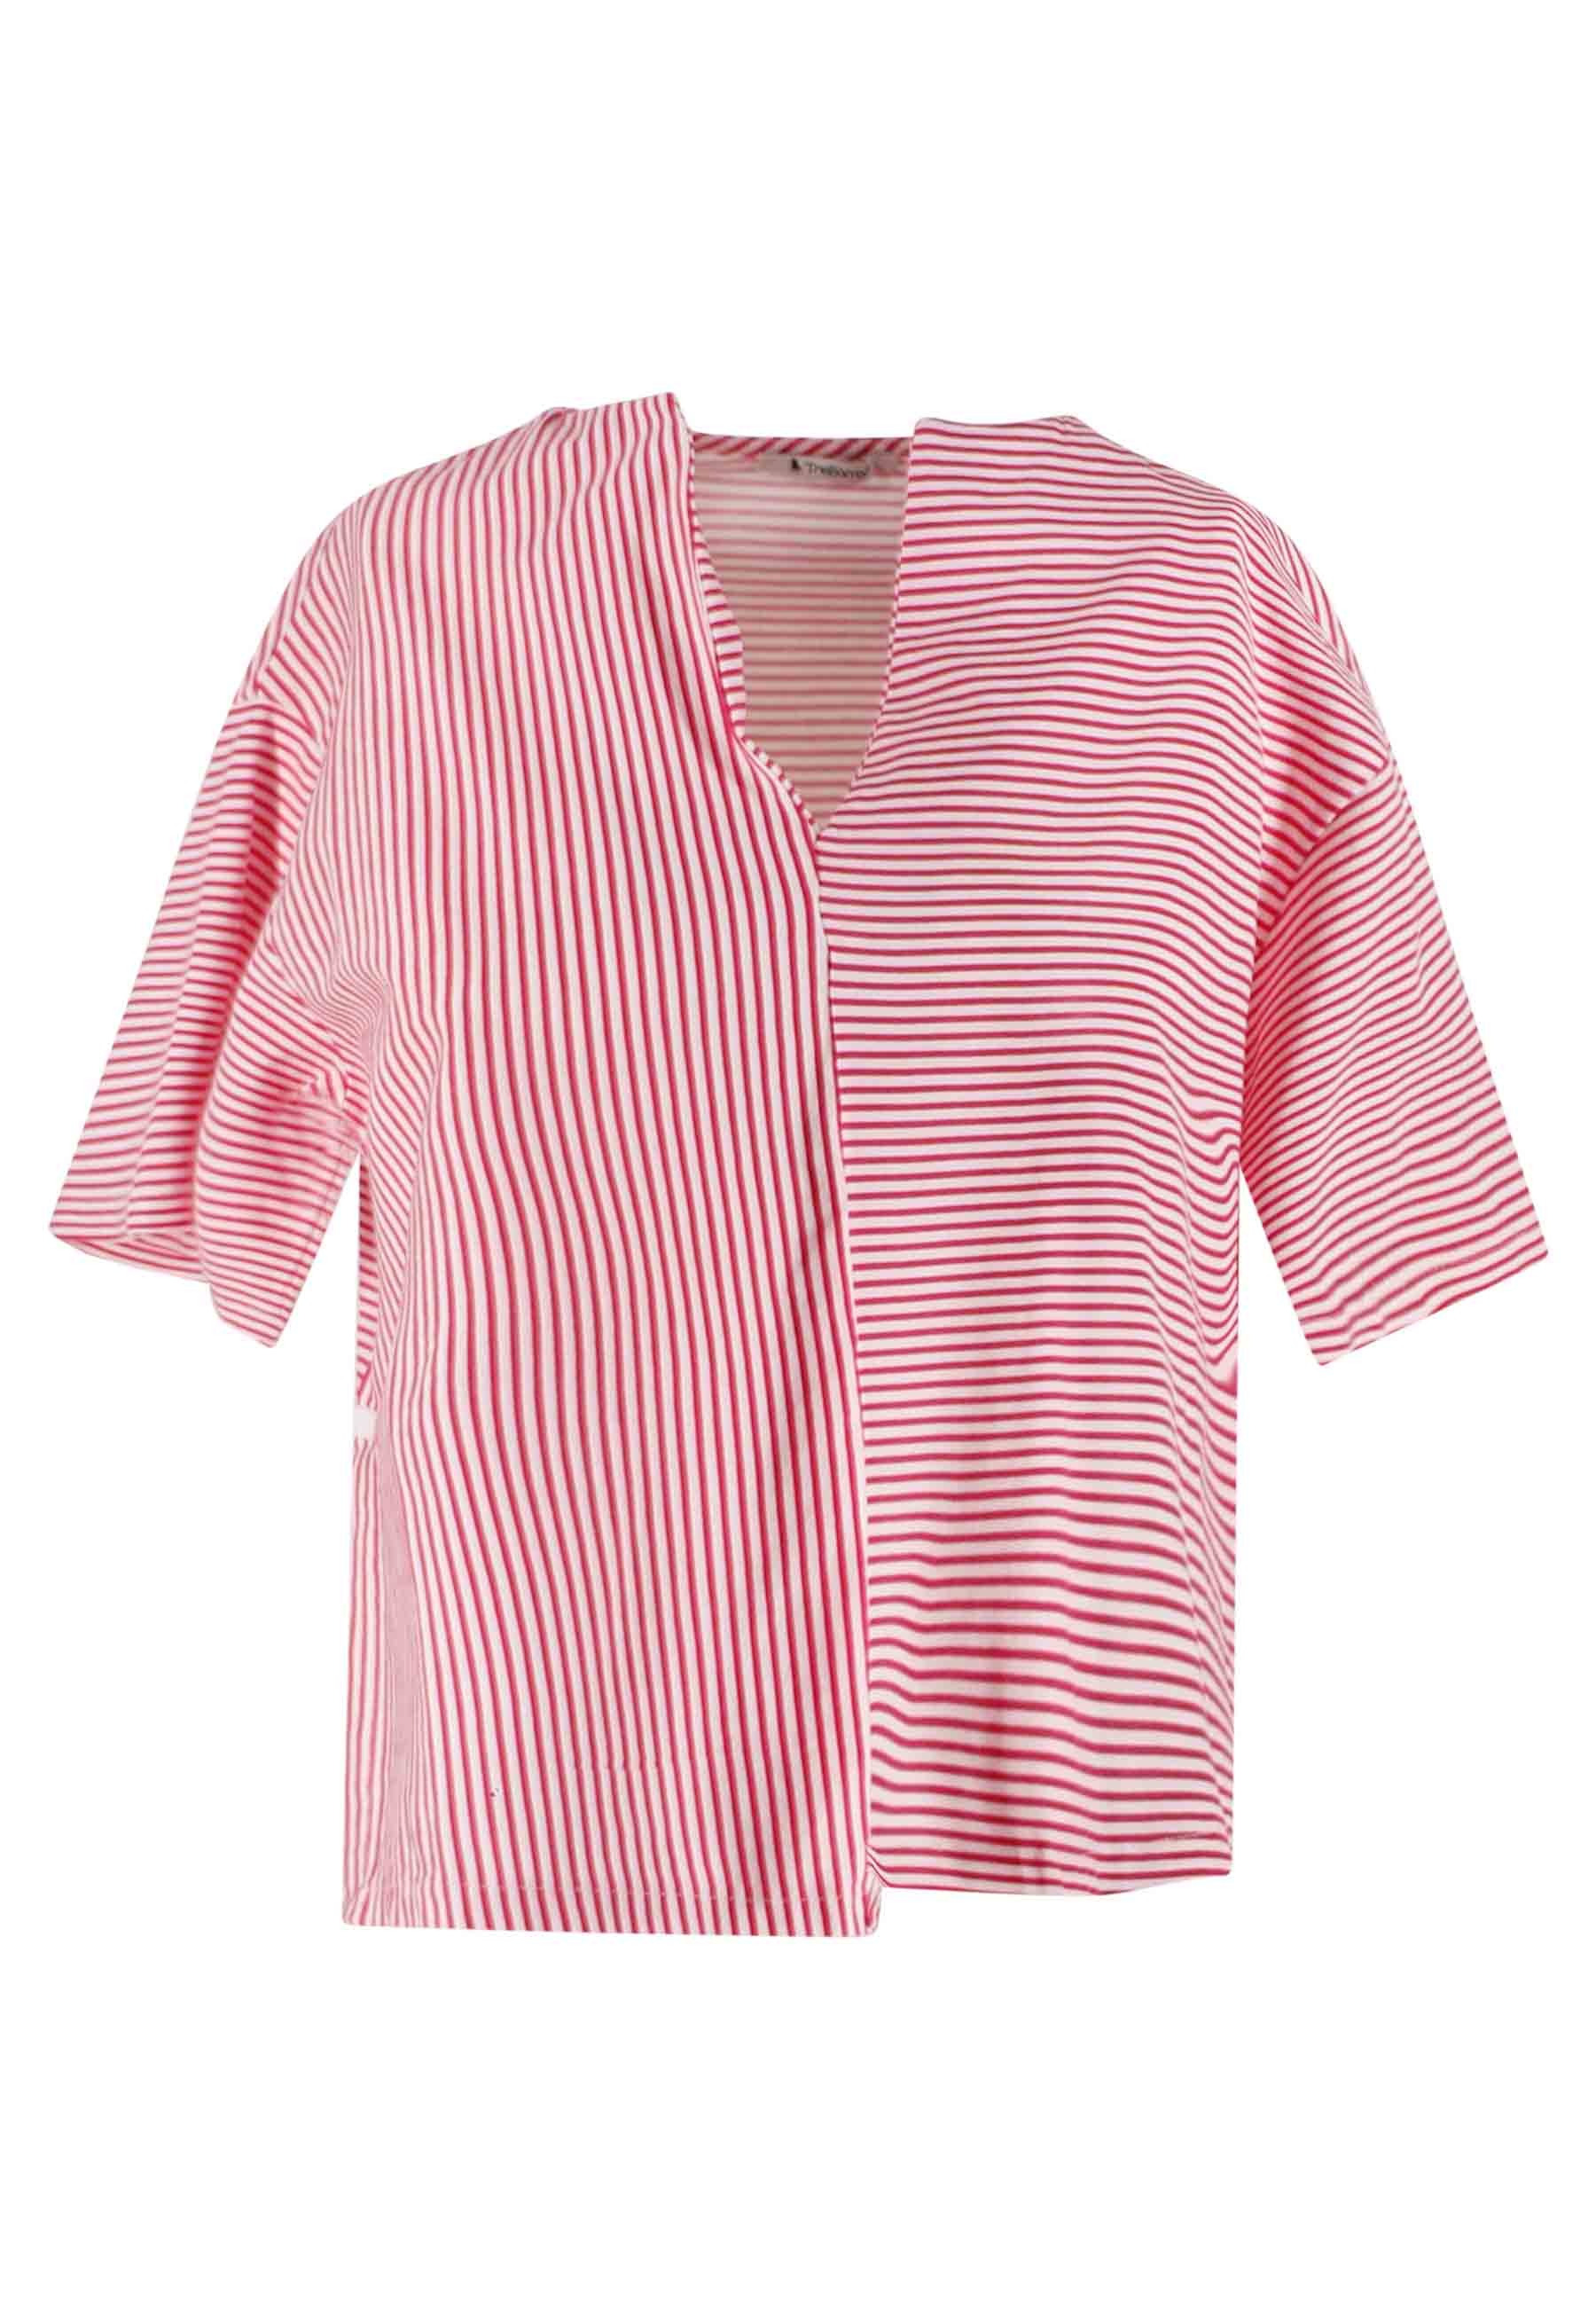 Tita women's t-shirt in white and red striped cotton and V-neck